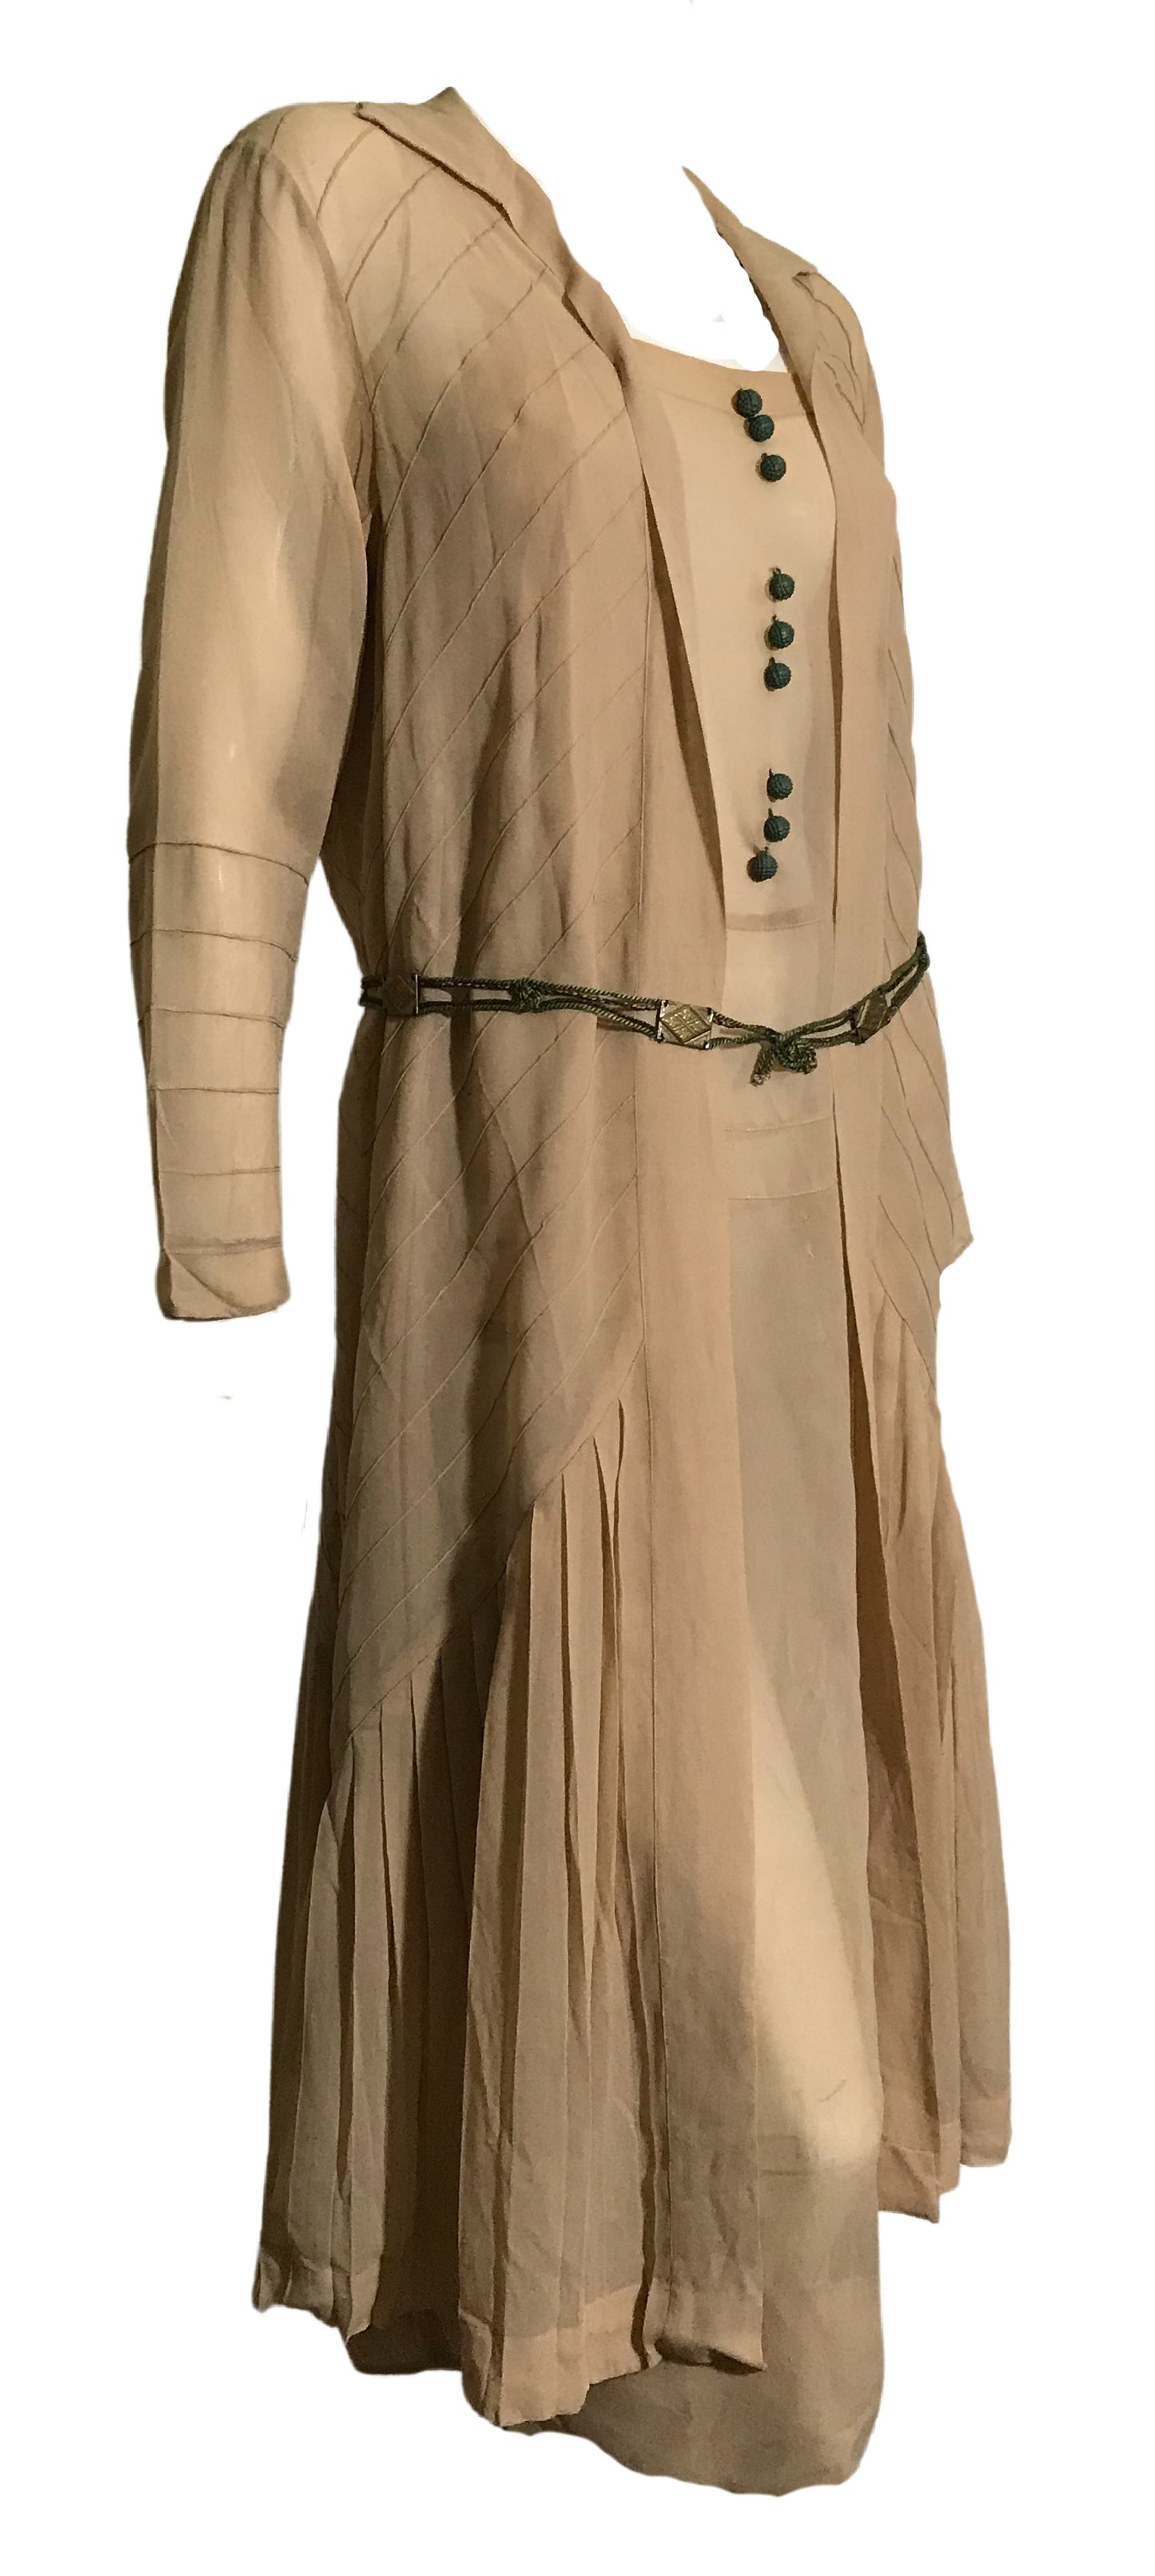 Egyptian Revival Warm Ivory Silk 2 Piece Day Dress with Green Metal Buttons and Braided Silk Sash circa 1920s